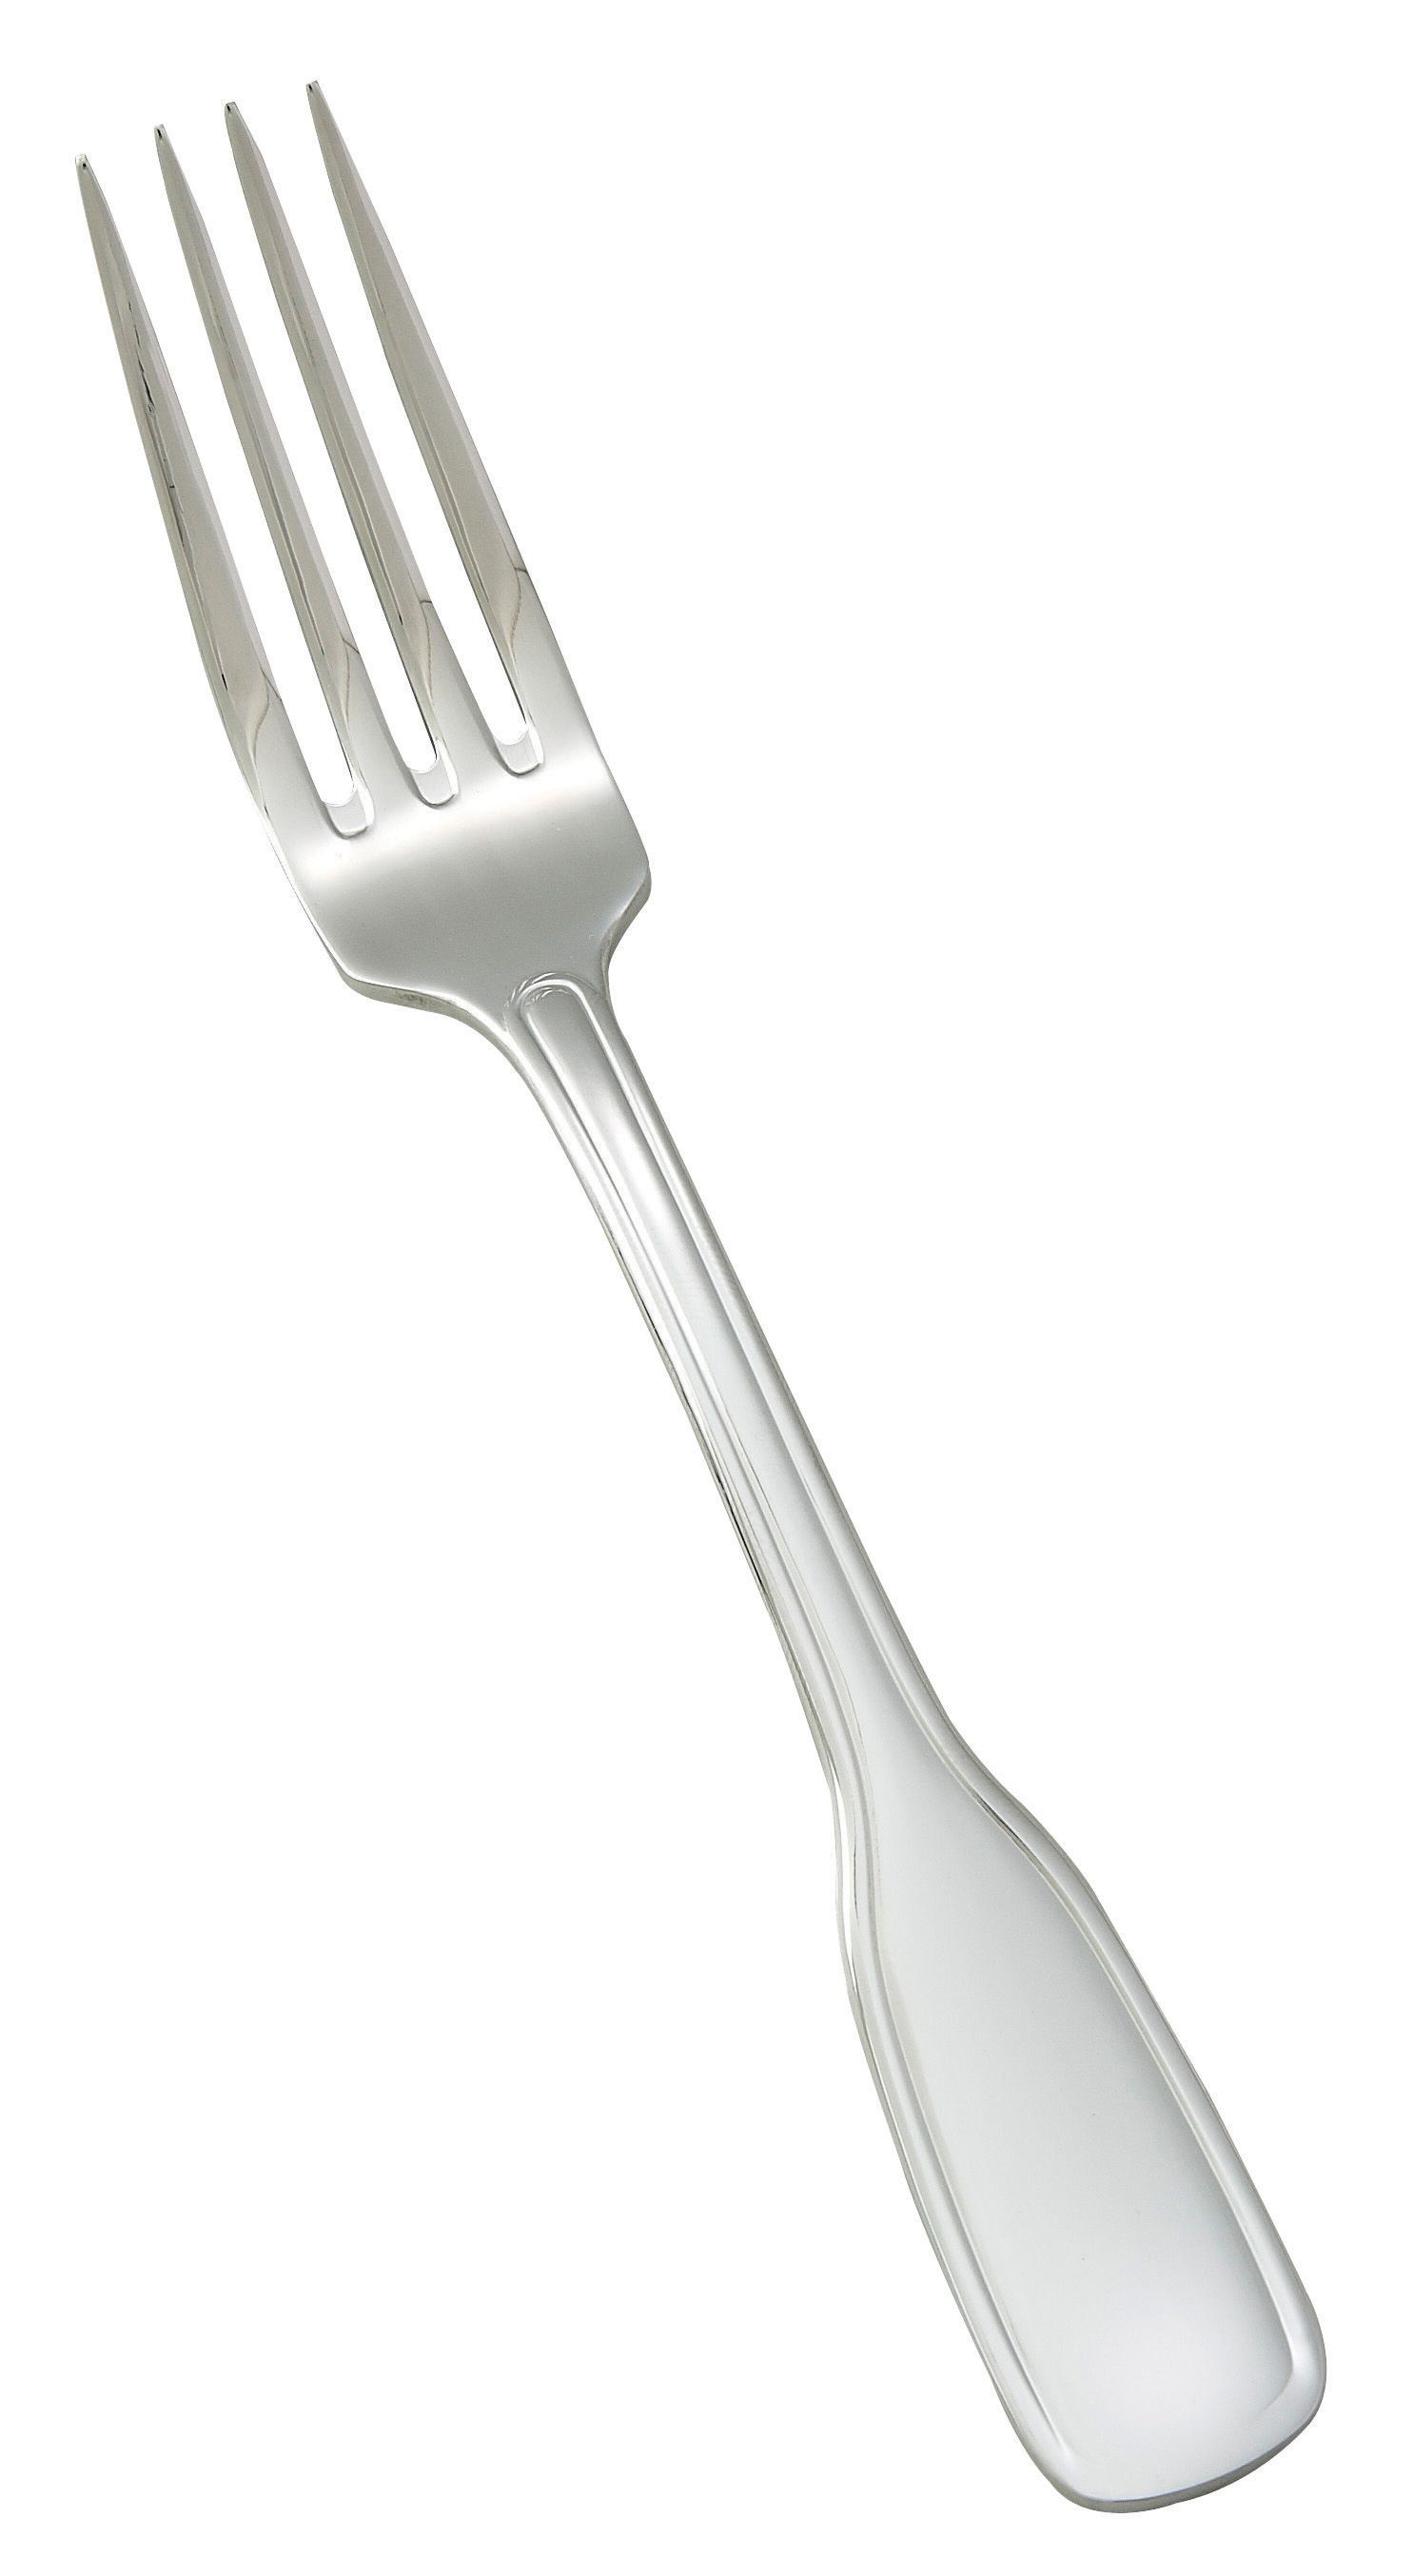 Winco 0033-05 Oxford Extra Heavy Stainless Steel Dinner Fork (12/Pack)